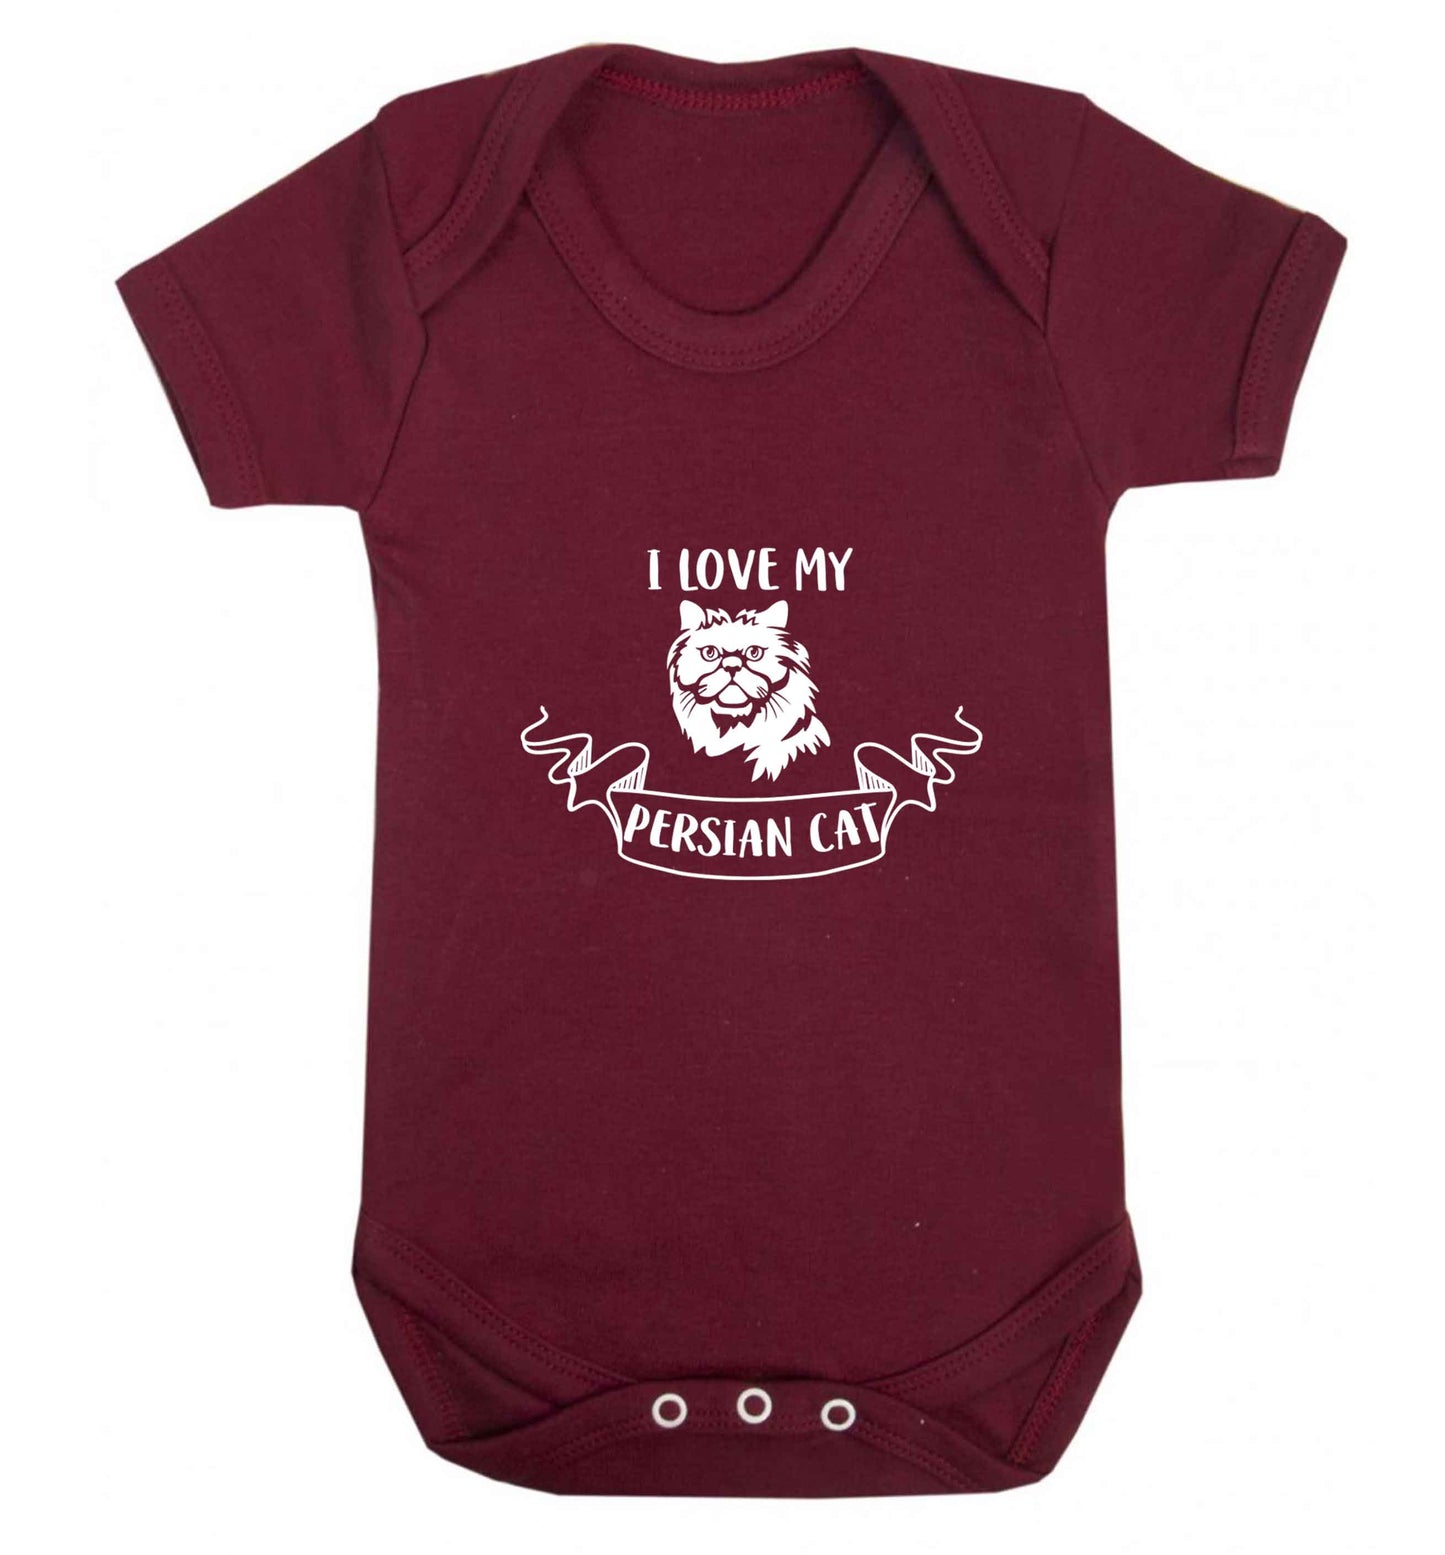 I love my persian cat baby vest maroon 18-24 months